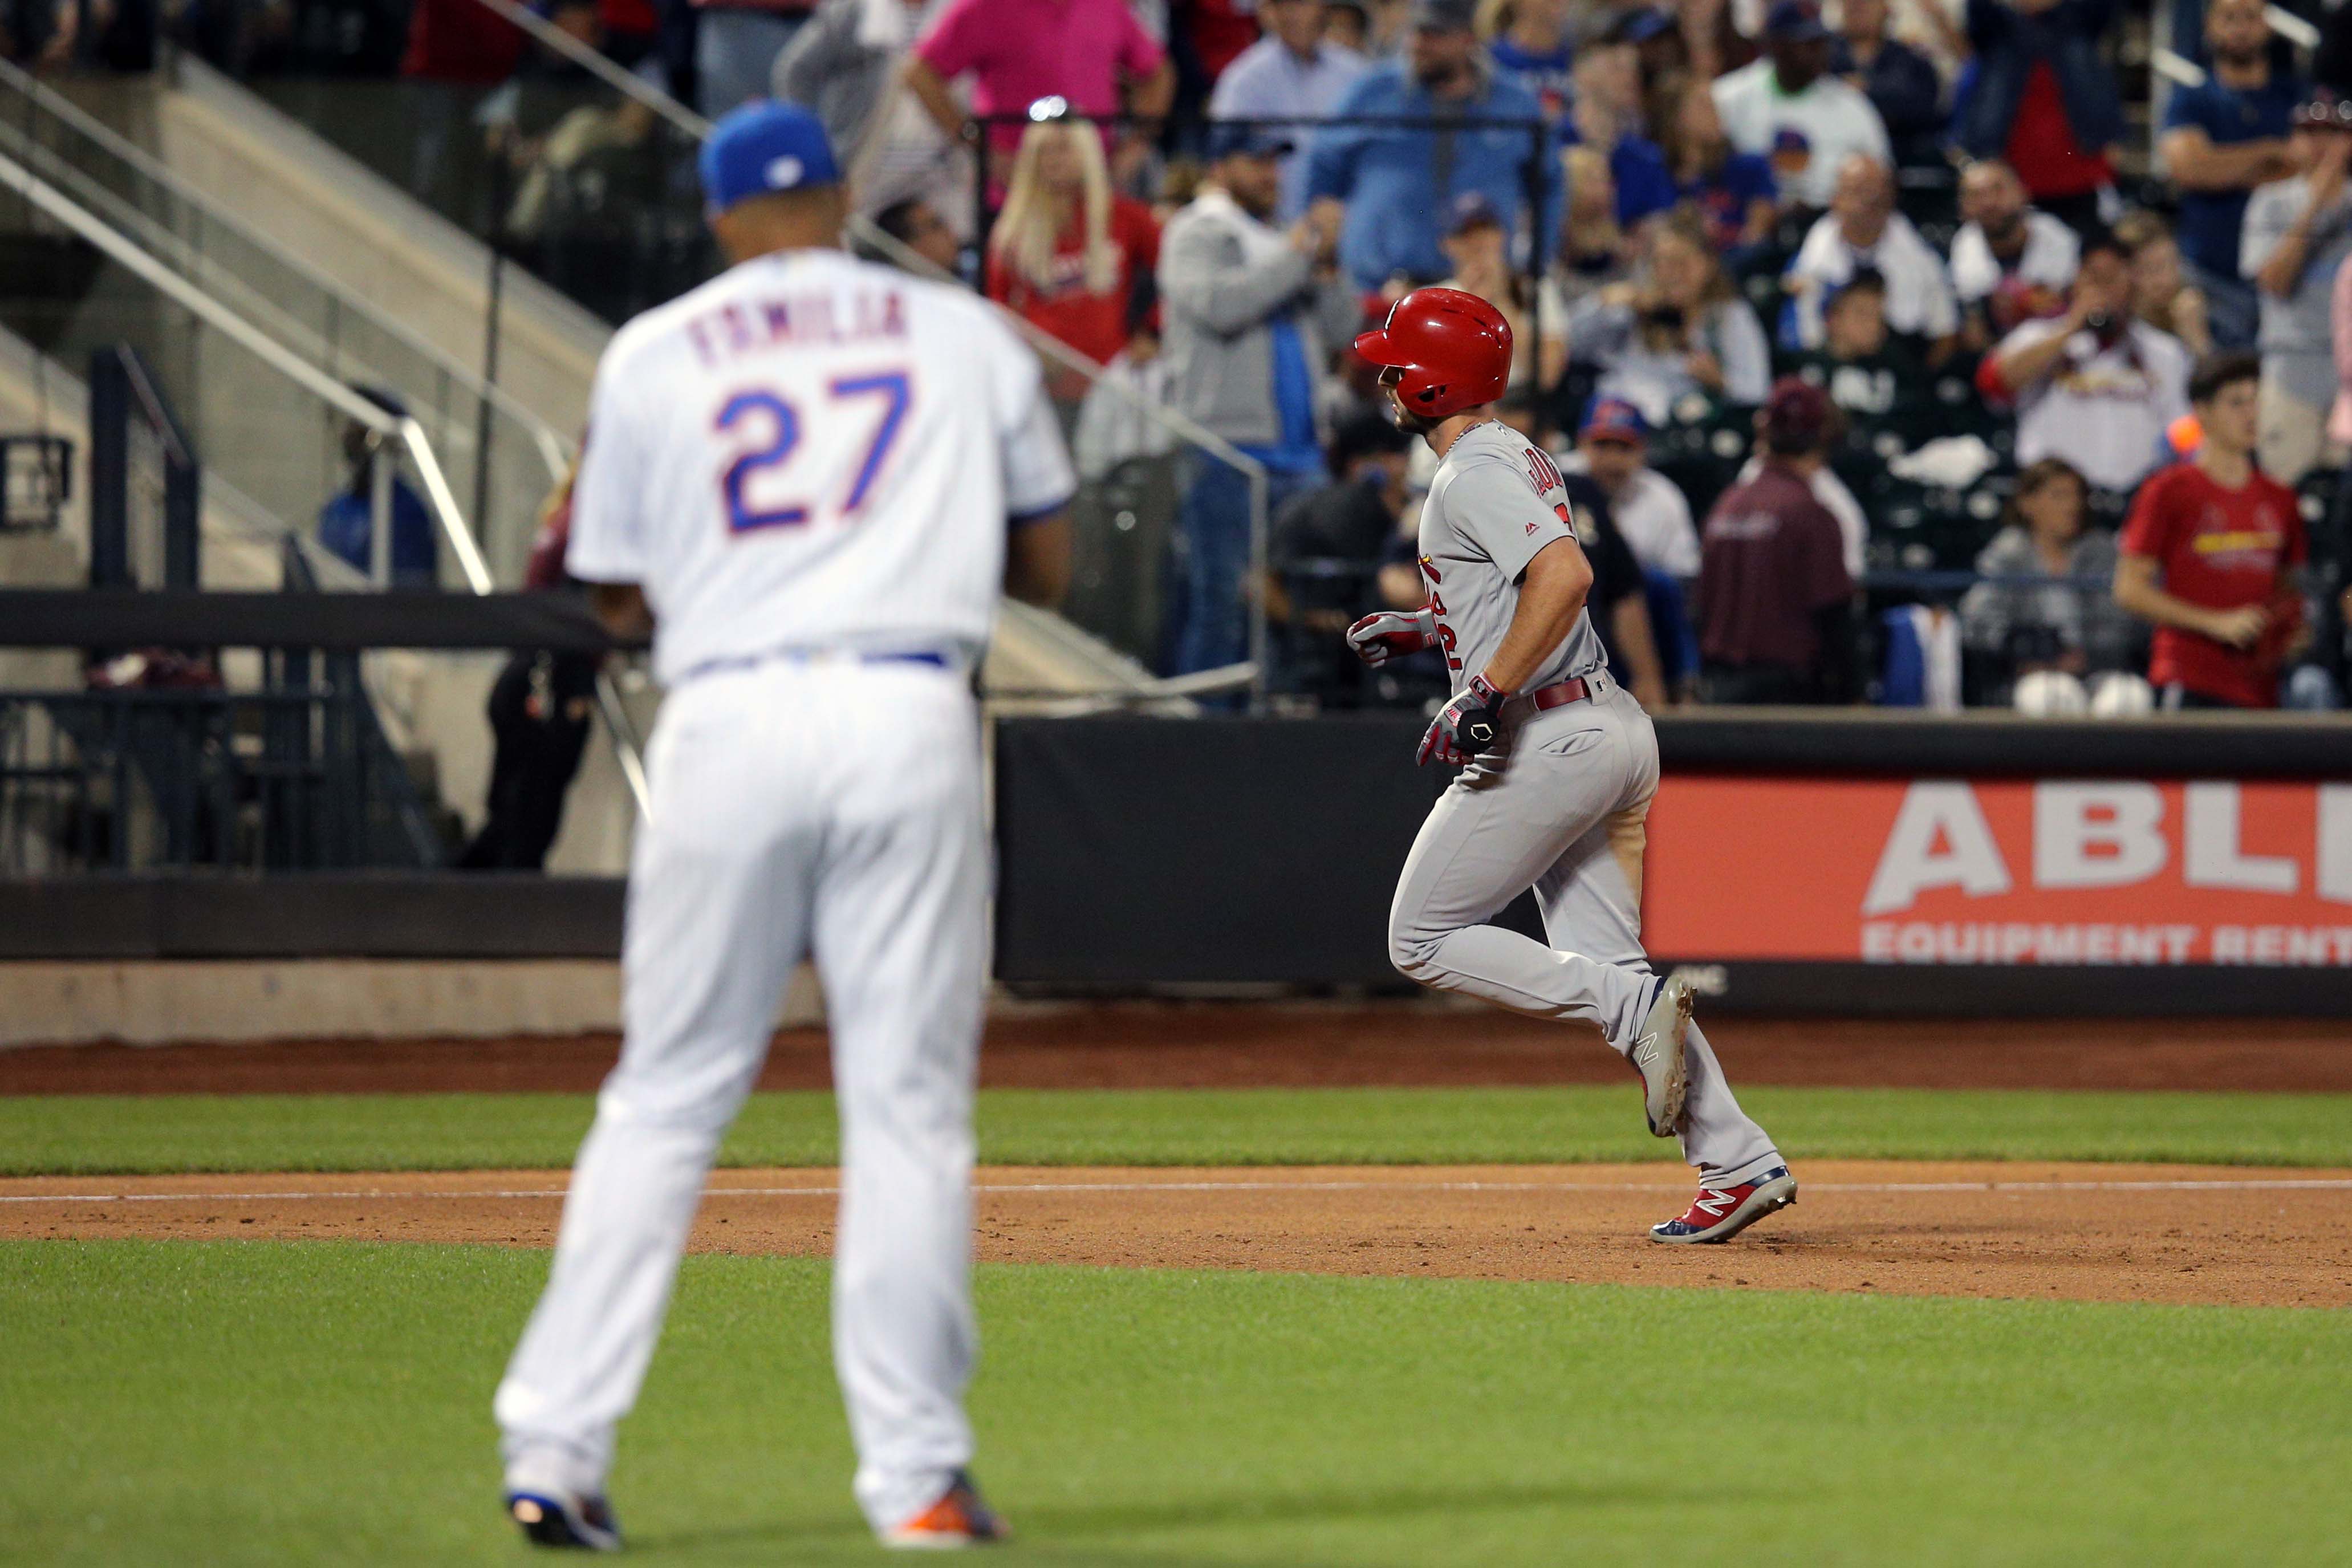 6/15/19 Game Preview: St. Louis Cardinals at New York Mets